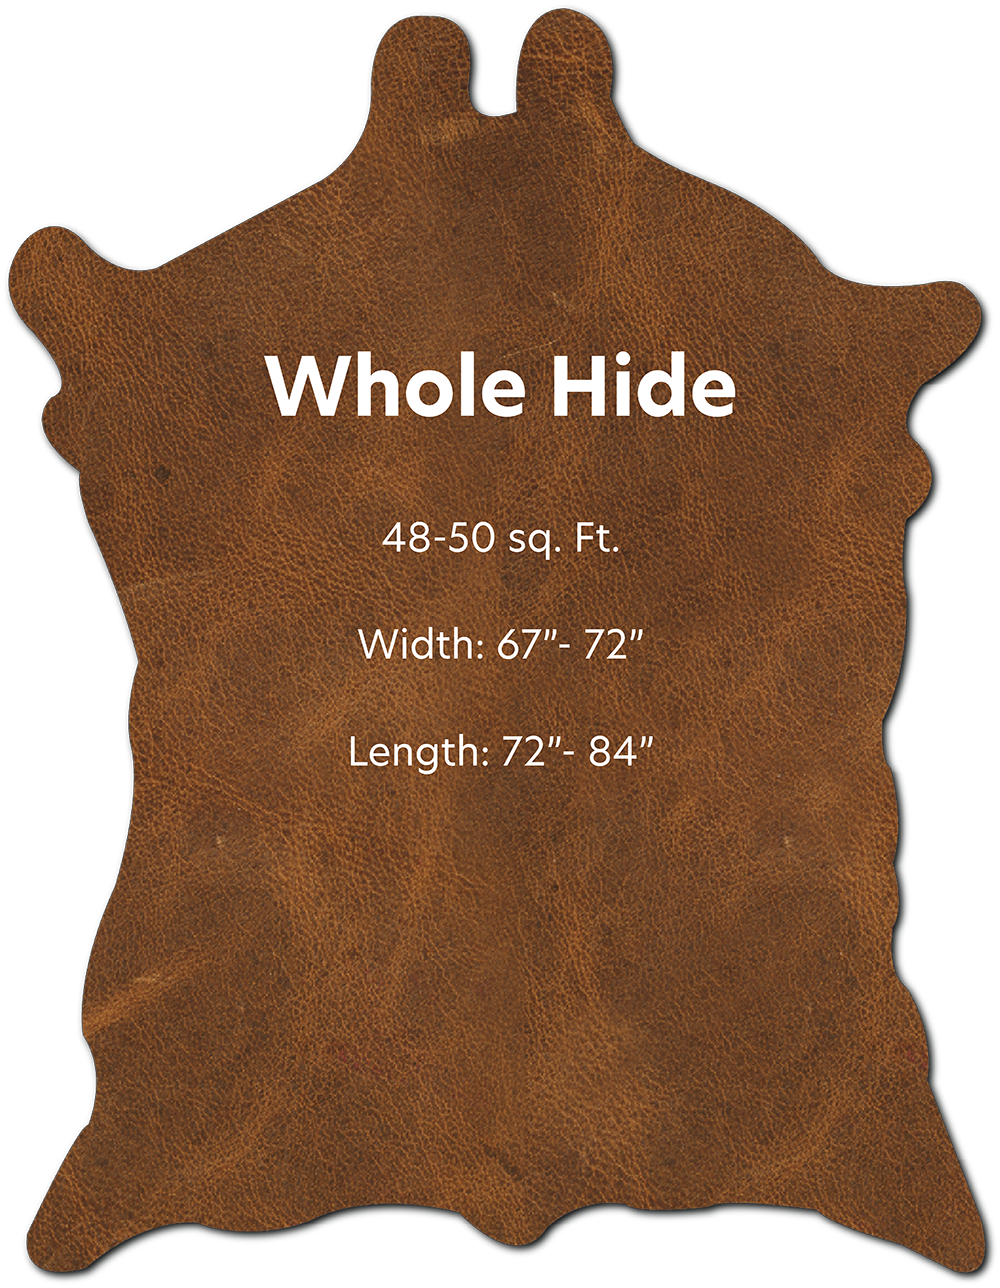 Whole Hide with Dimensions